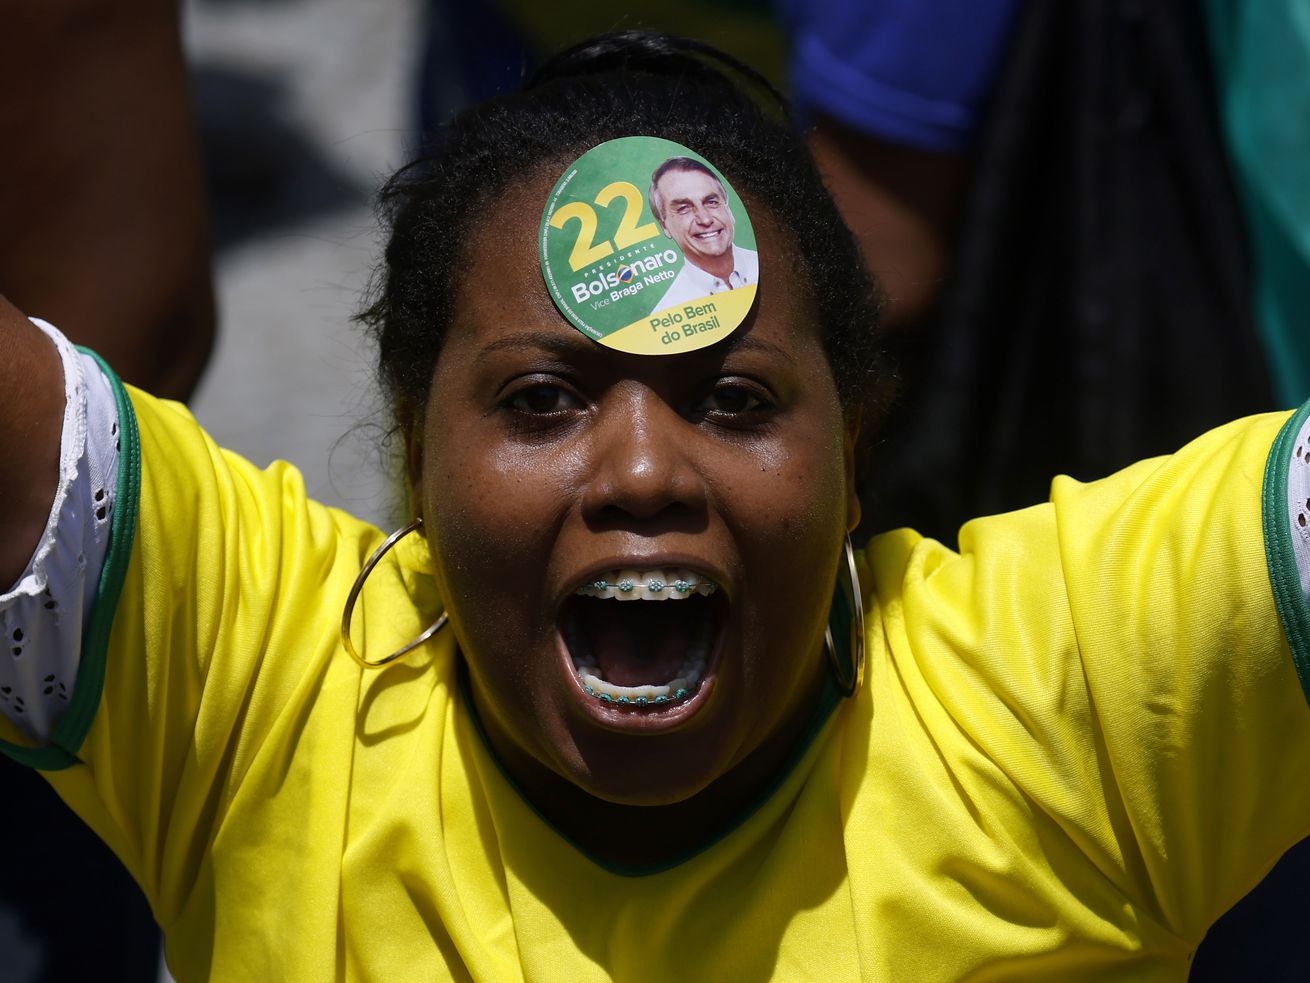 A woman in a yellow shirt wears a sticker on her forehead supporting Bolsonaro in 2022. Her arms are raised and she is cheering. 